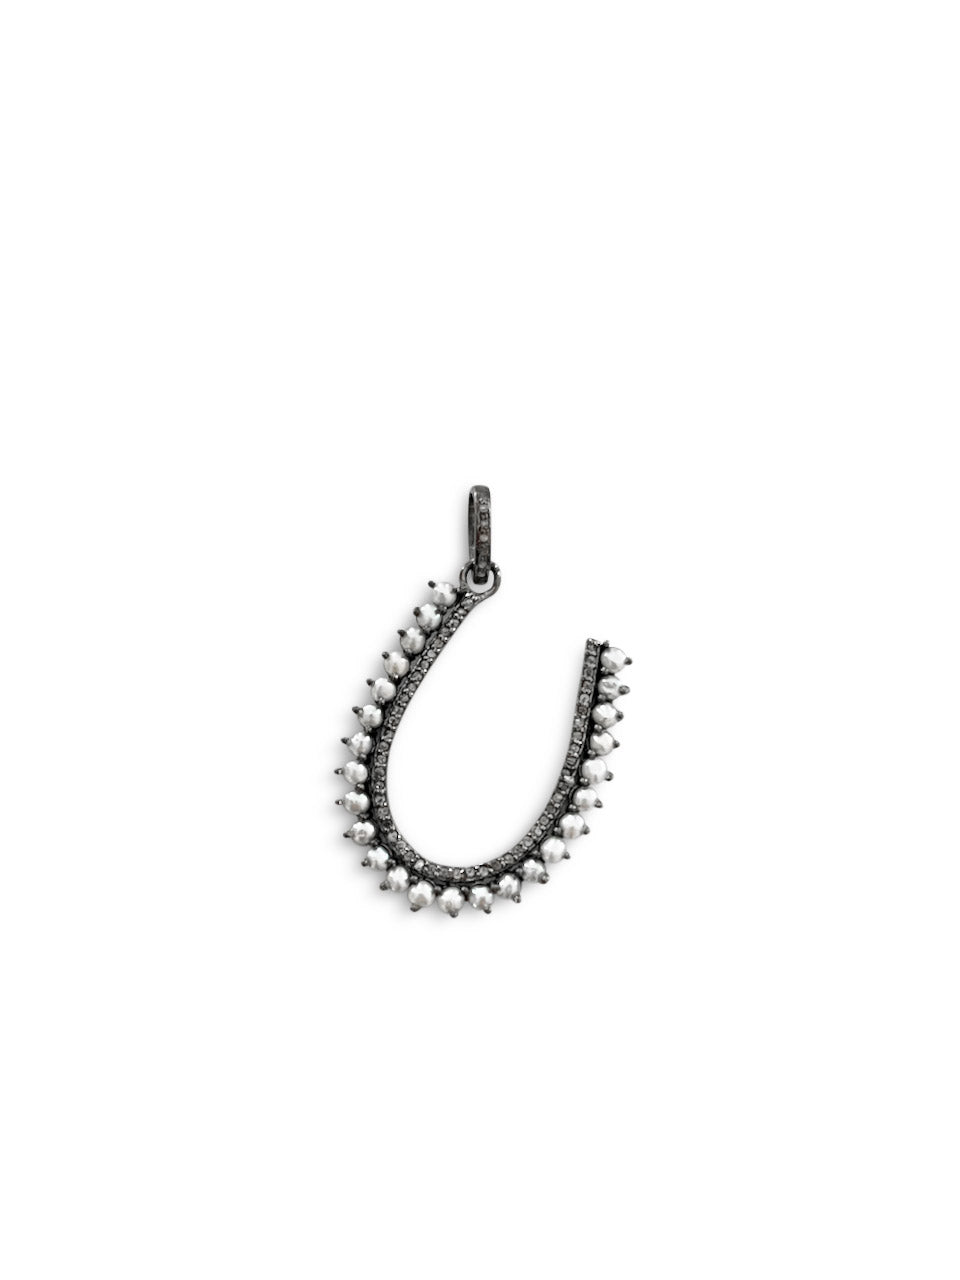 Freshwater Pearl and Pave Diamond Horseshoe in Sterling Silver